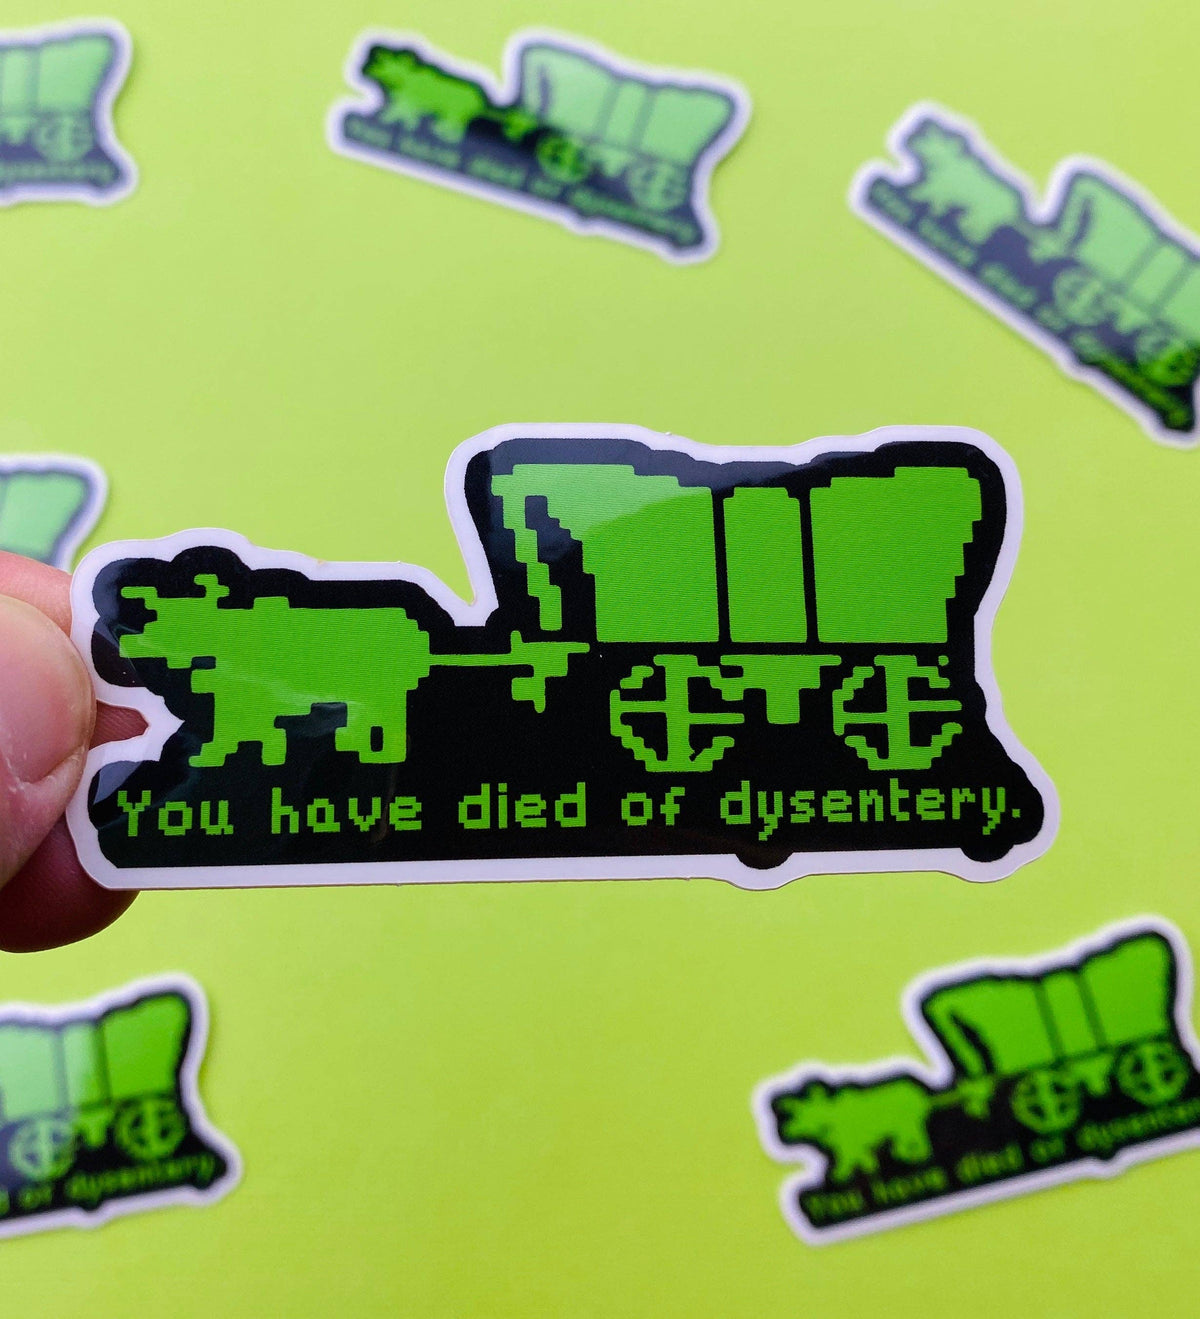 Oregon Trail Sticker Eighties Sticker 1980s Sticker Retro Gaming Sticker Funny Decal for Eighties Kids: 4&quot;x1.75&quot;